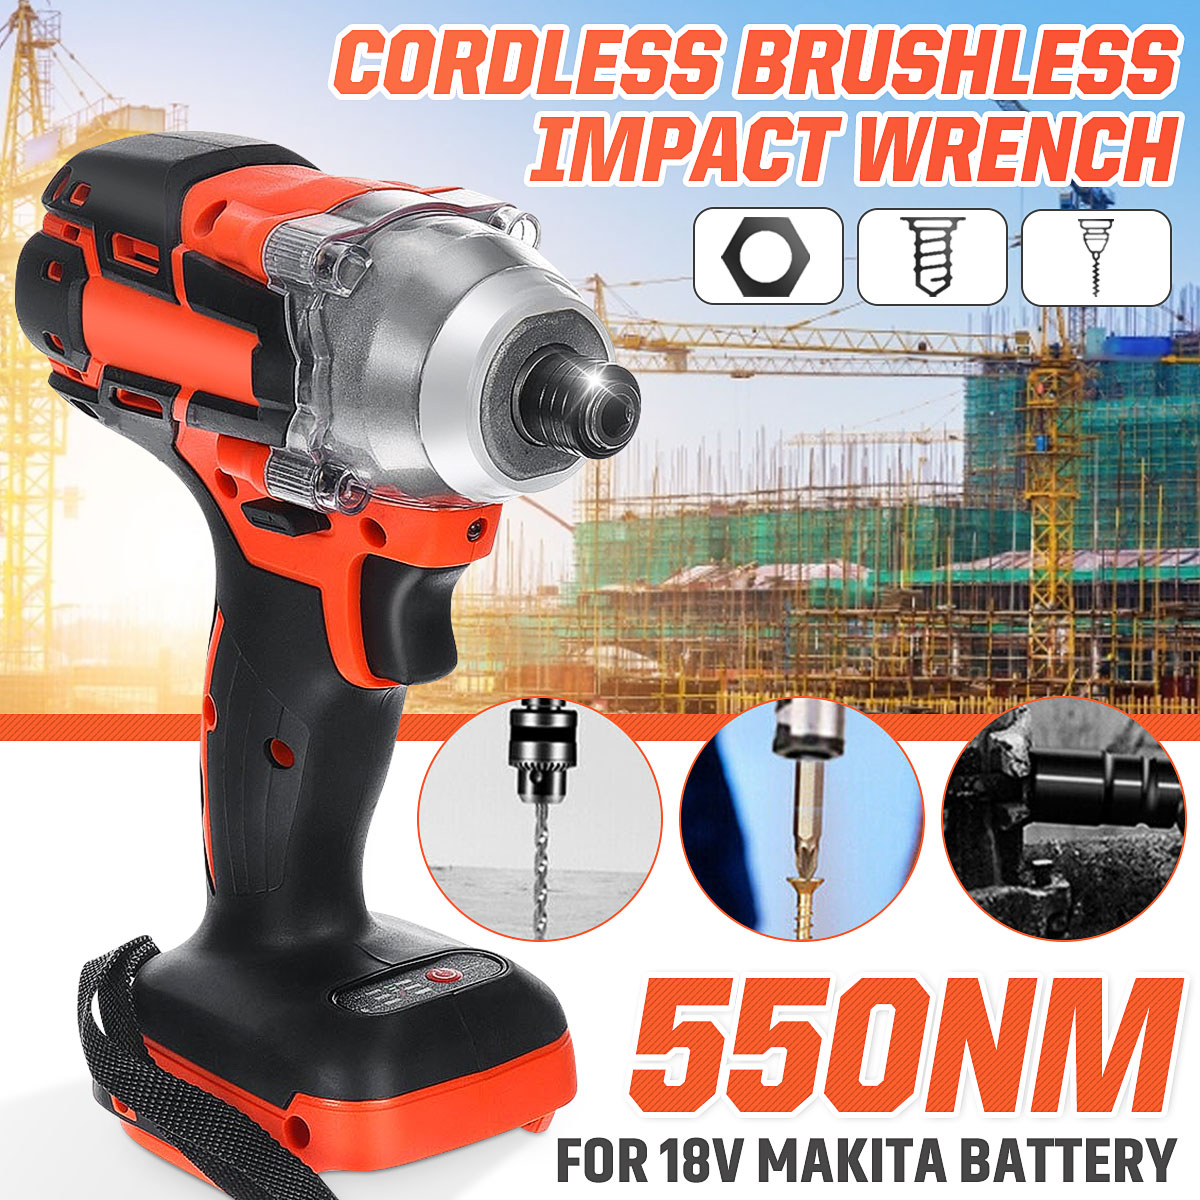 38quot-Brushless-Impact-Wrench-Cordless-550NM-High-Torque-For-18V-Battery-1789863-2